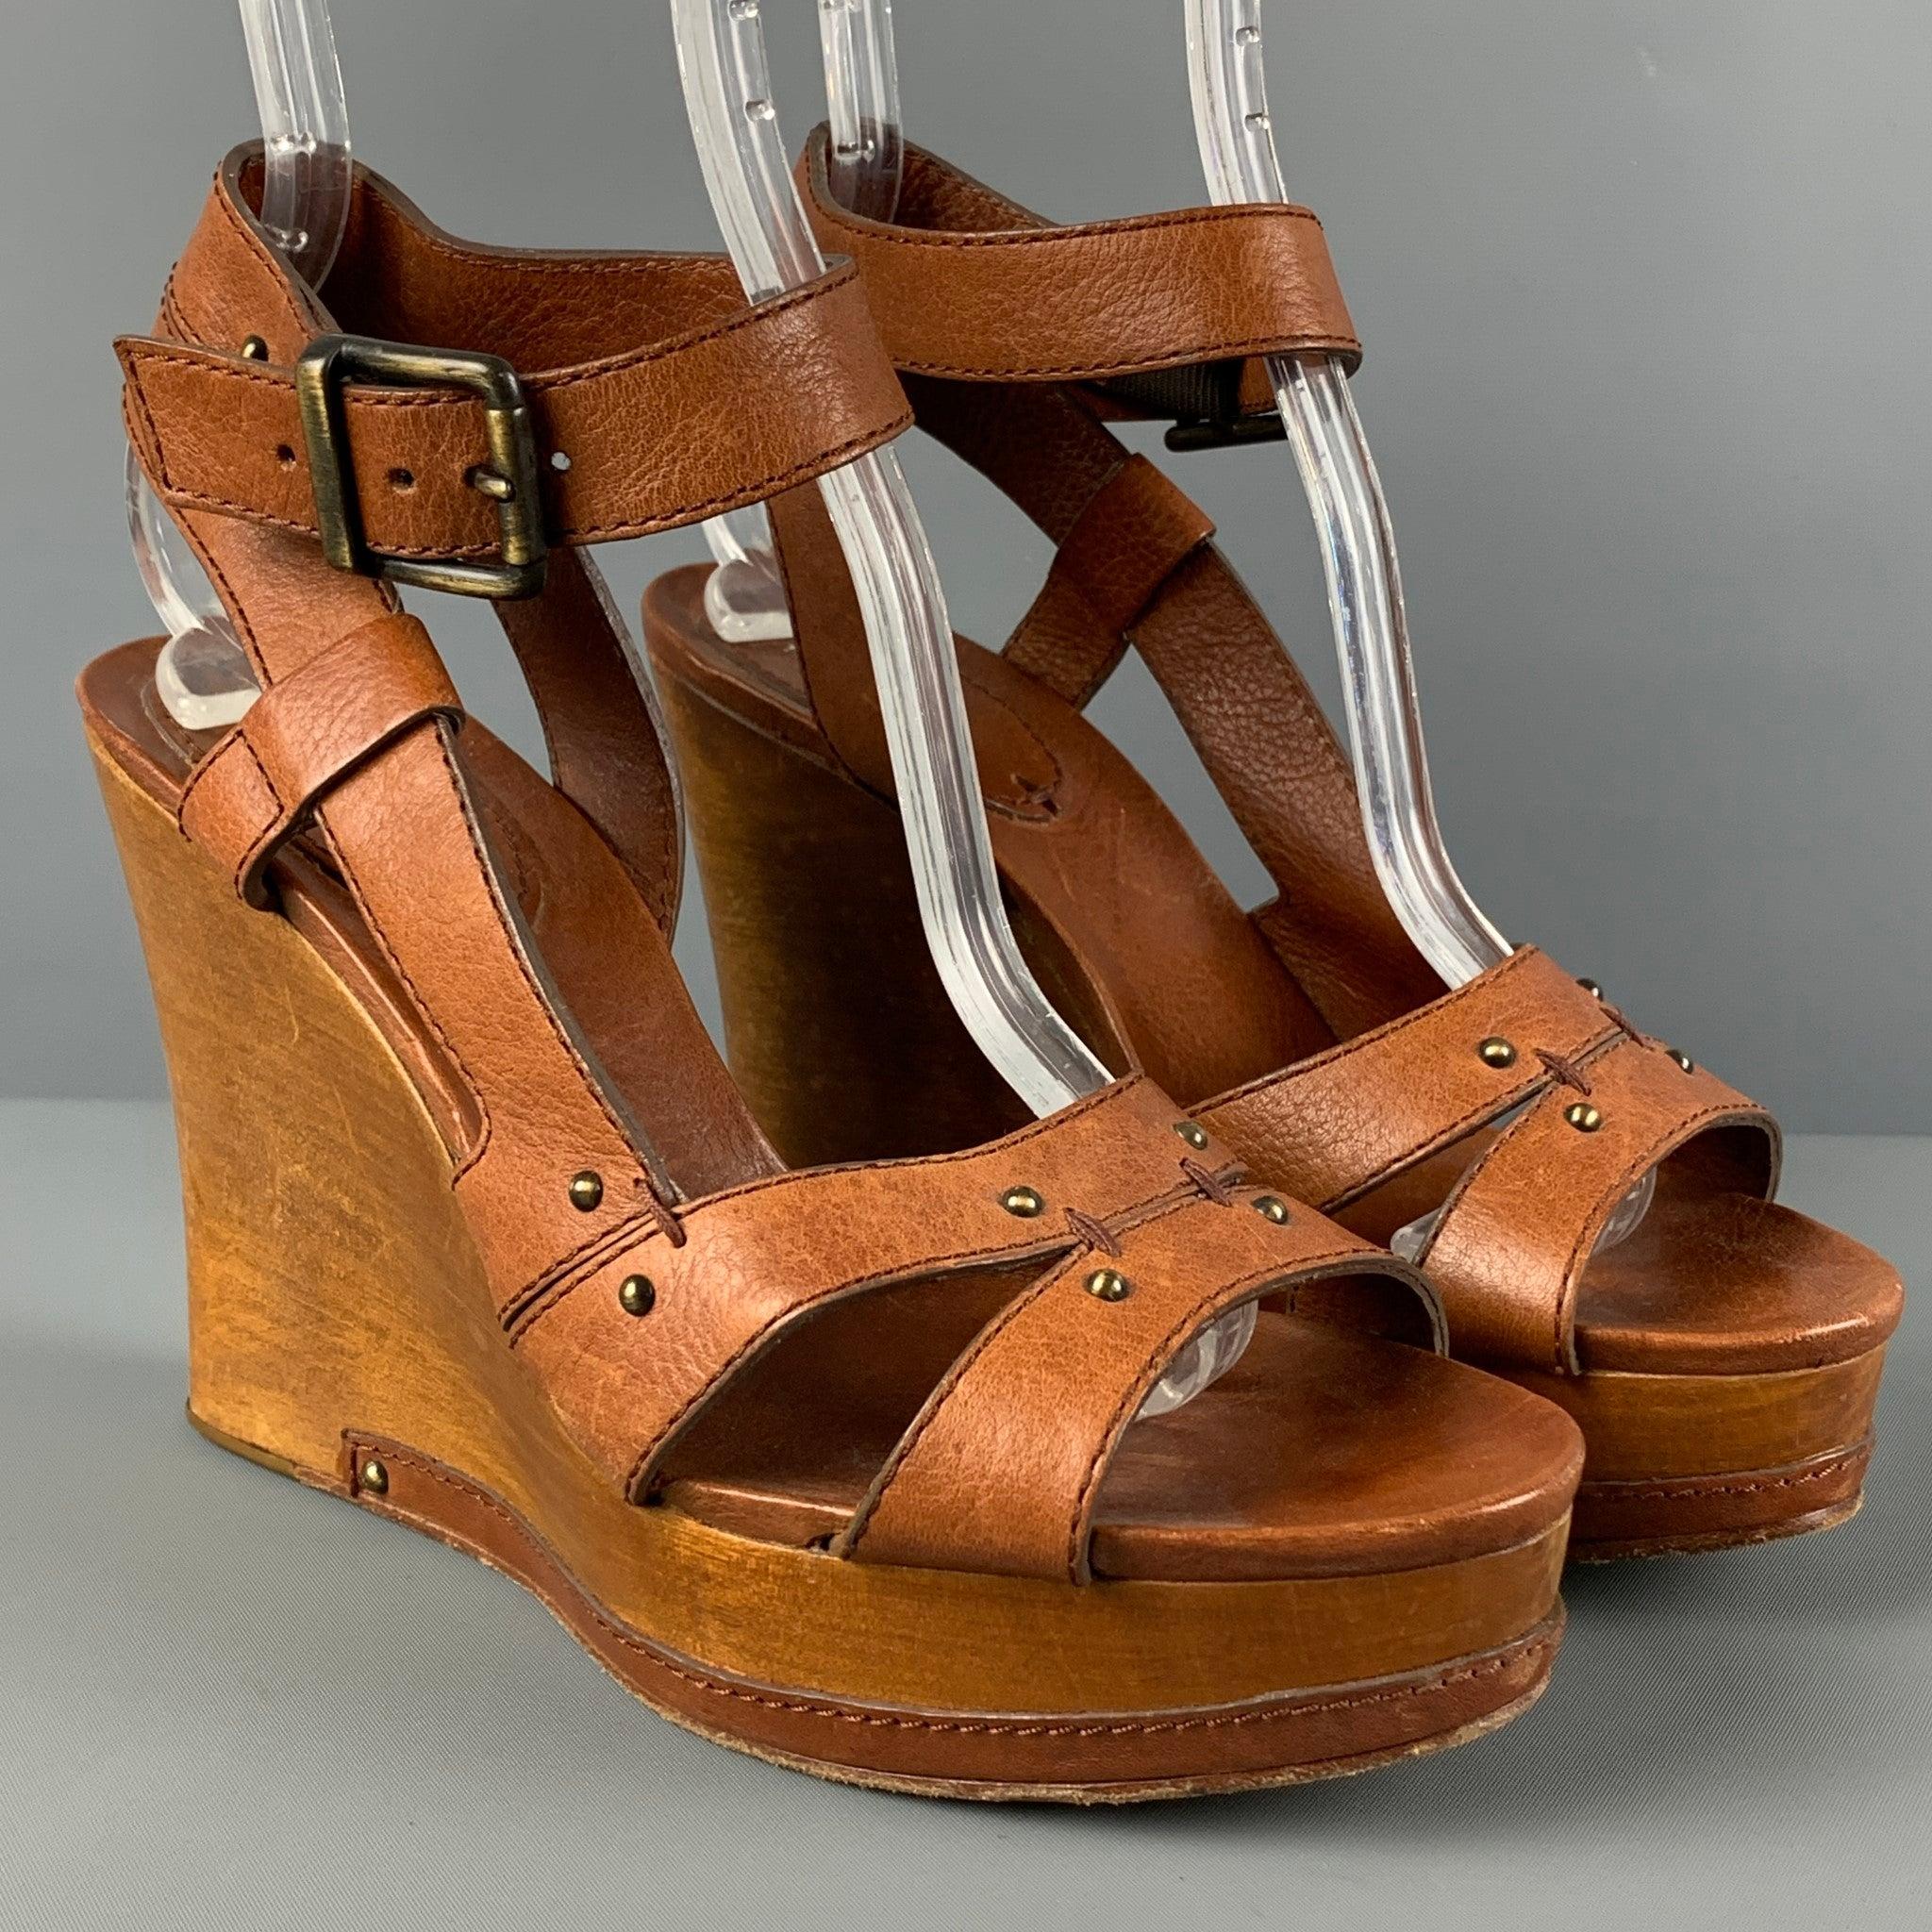 CHLOE sandals comes in a tan leather featuring a platform style, open toe, strap closure, and a wedge heel. Made in Italy.
 Good
 Pre-Owned Condition. Moderate wear. As-is.  
 

 Marked:  39 
 

 Measurements: 
  Heel: 4.25 inches Platform: 1.25